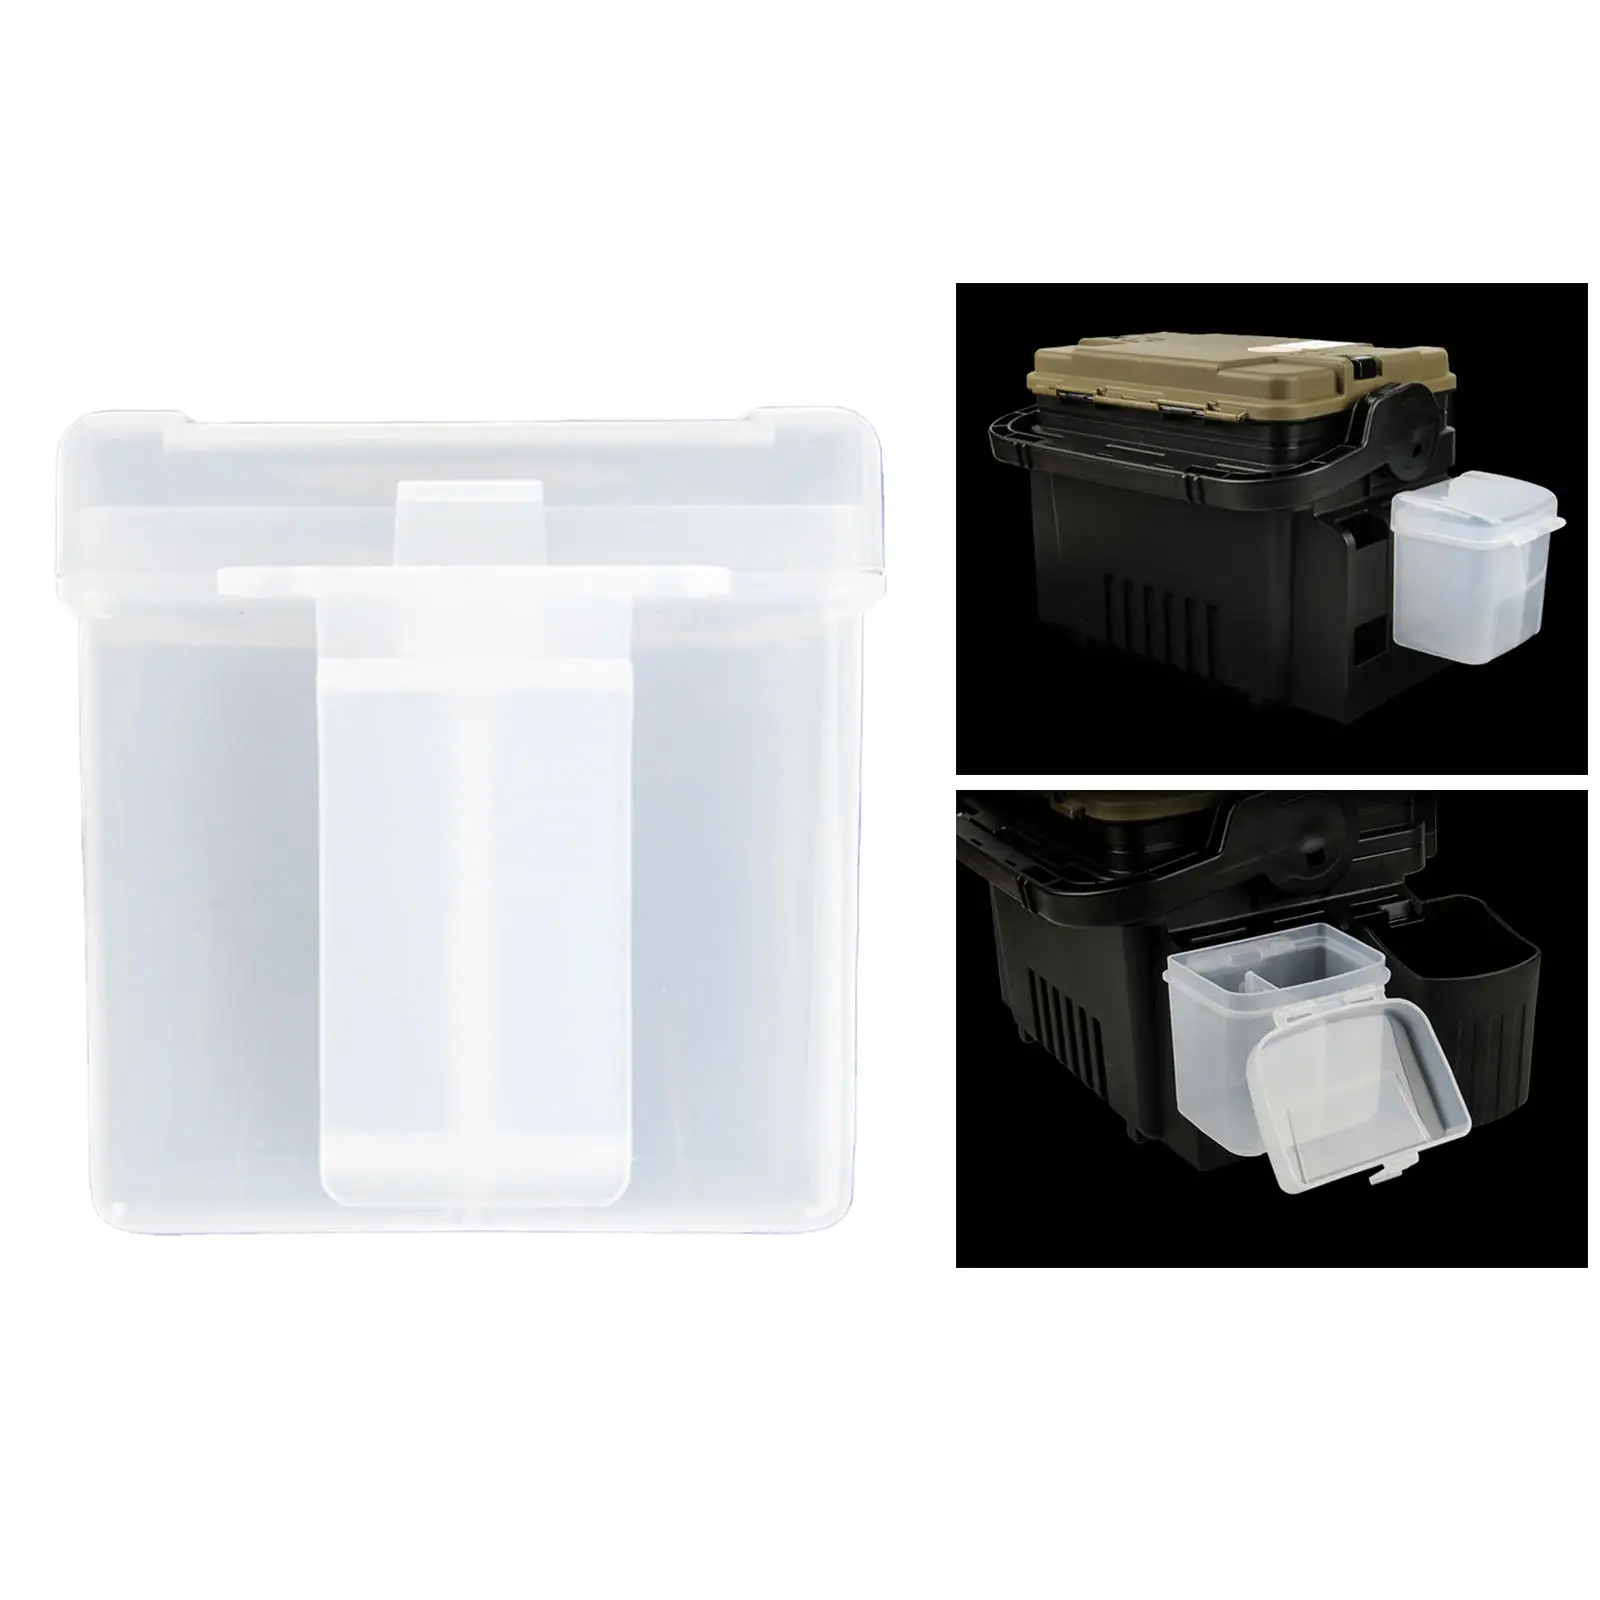 Portable Clear Plastic Fishing Bait Tackle Box Storage Case Hanger Container